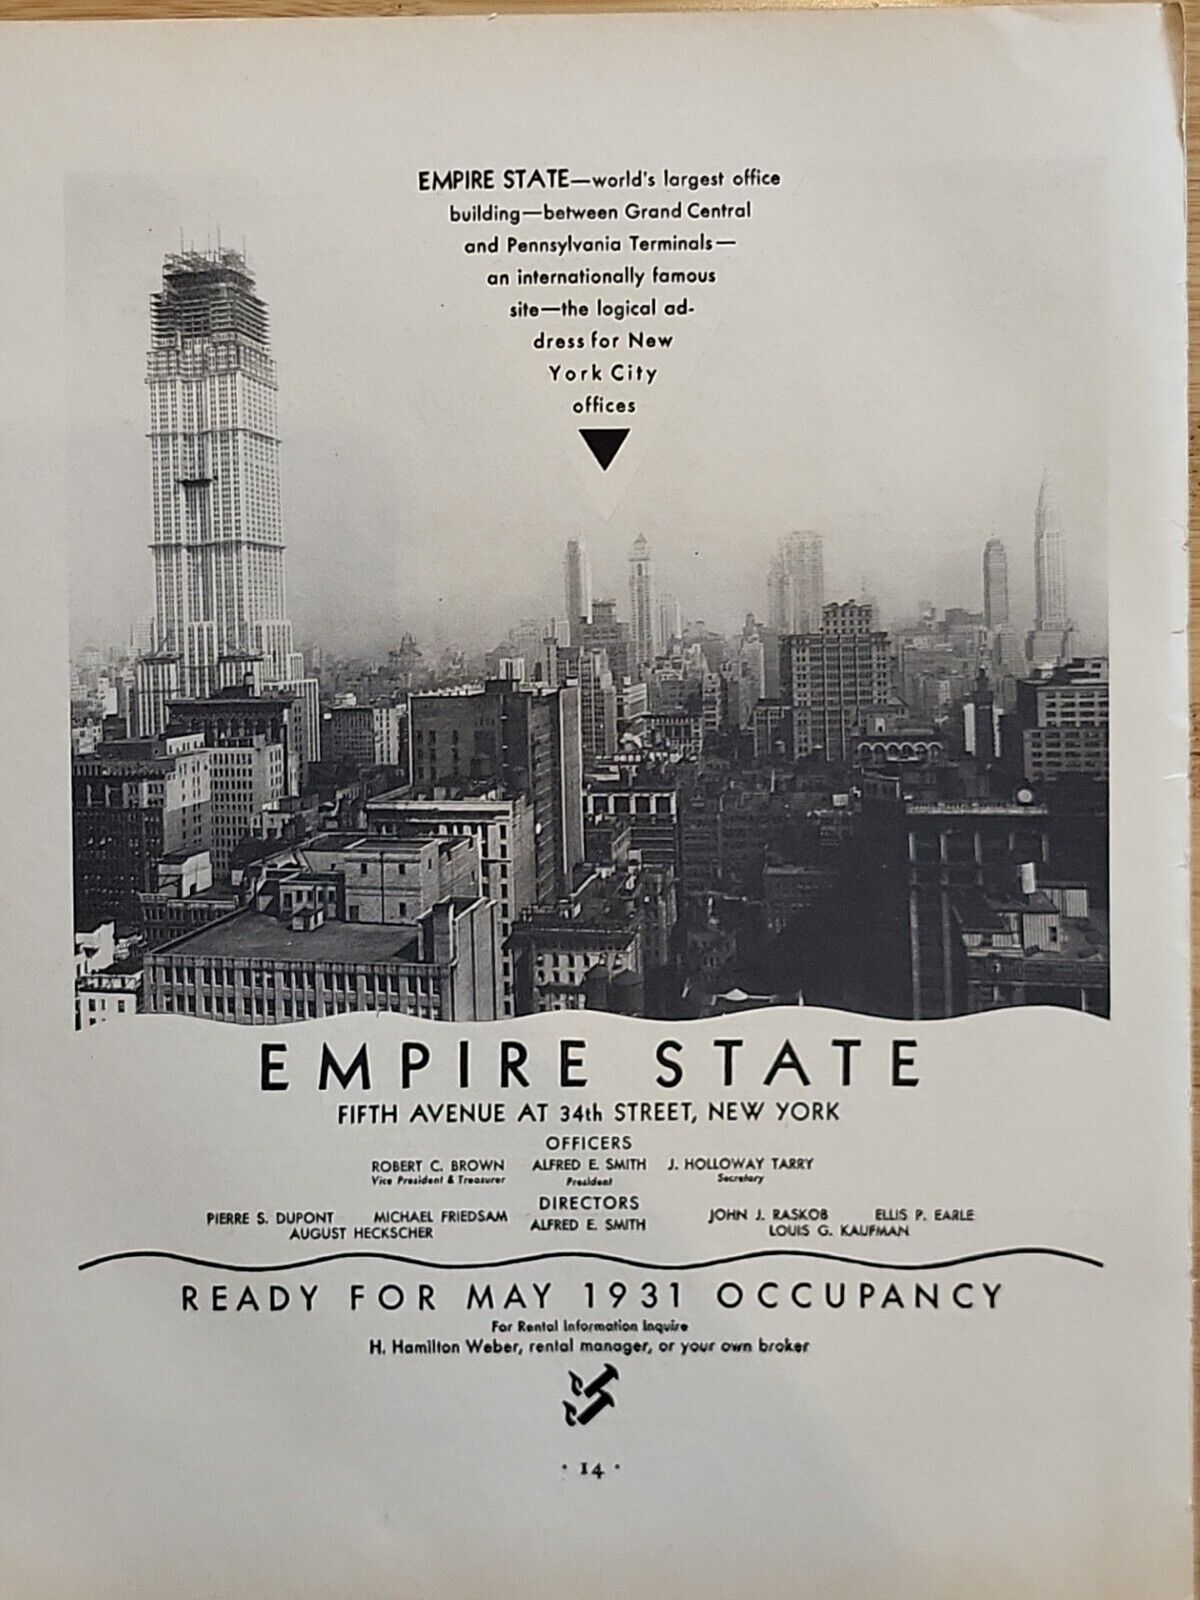 1930 Empire State Building Fortune Magazine EARLIEST Print Advertising Tearsheet